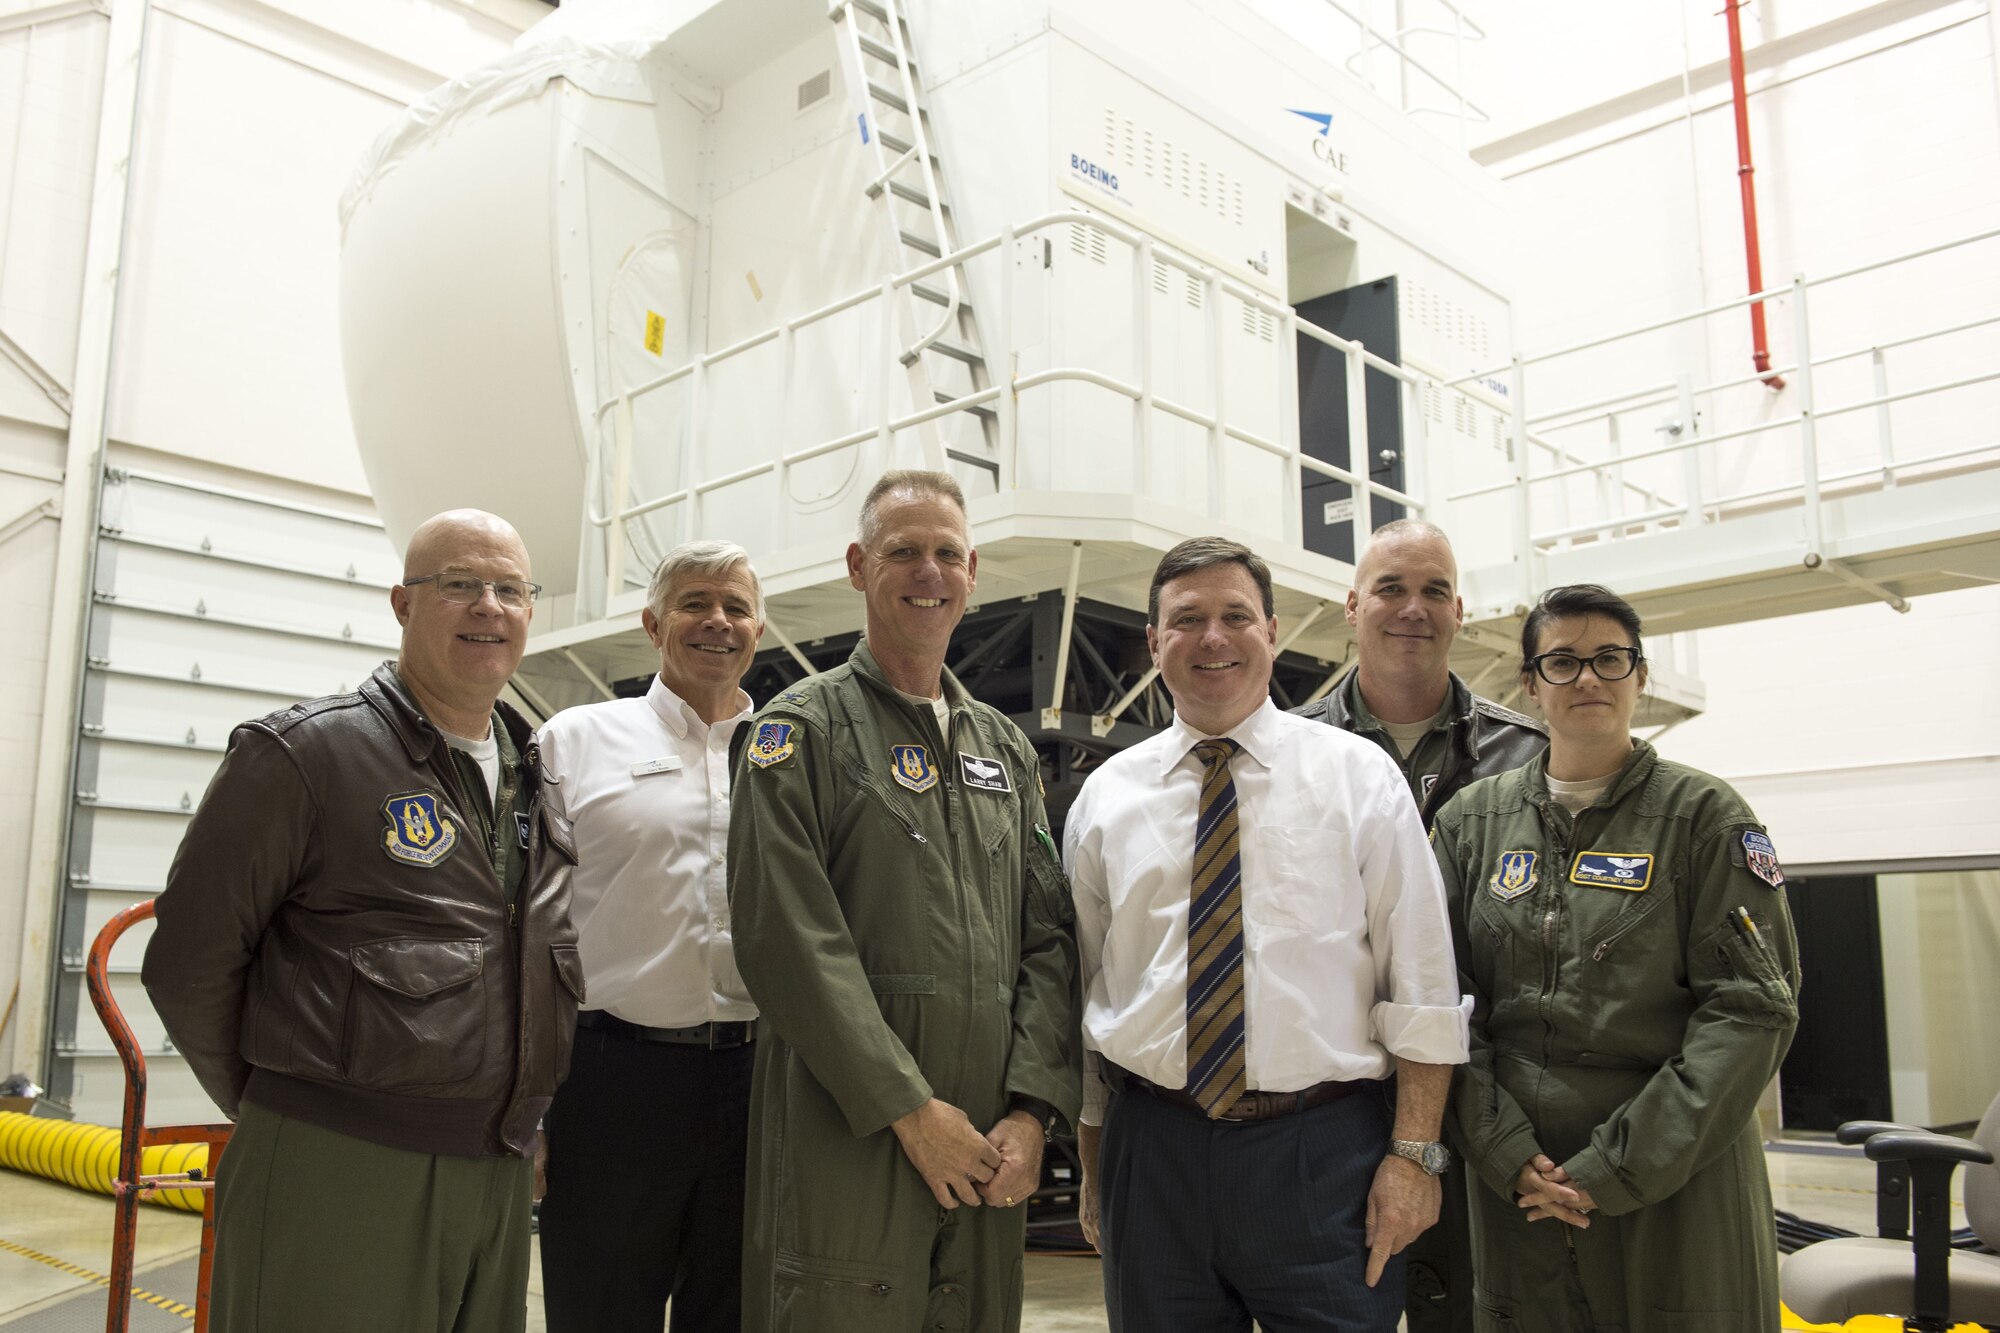 From the left, Lt. Col. Todd Moody, 434th Operations Group commander, Gary Beebe, Grissom’s site focal pilot, Col. Larry Shaw, 434th Air Refueling Wing commander, U.S. Rep. Todd Rokita, Lt. Col. Brian Thompson, 434th ARW chief of standards and evaluations, and Master Sgt. Courtney Werth, 72nd Air Refueling Squadron boom operator, pose for a photo at Grissom Air Reserve Base, Ind., Nov. 21, 2017. Rokita visited Grissom to learn more about the base and its role in both national defense and the Indiana economy. (U.S. Air Force graphic/Tech. Sgt. Benjamin Mota)